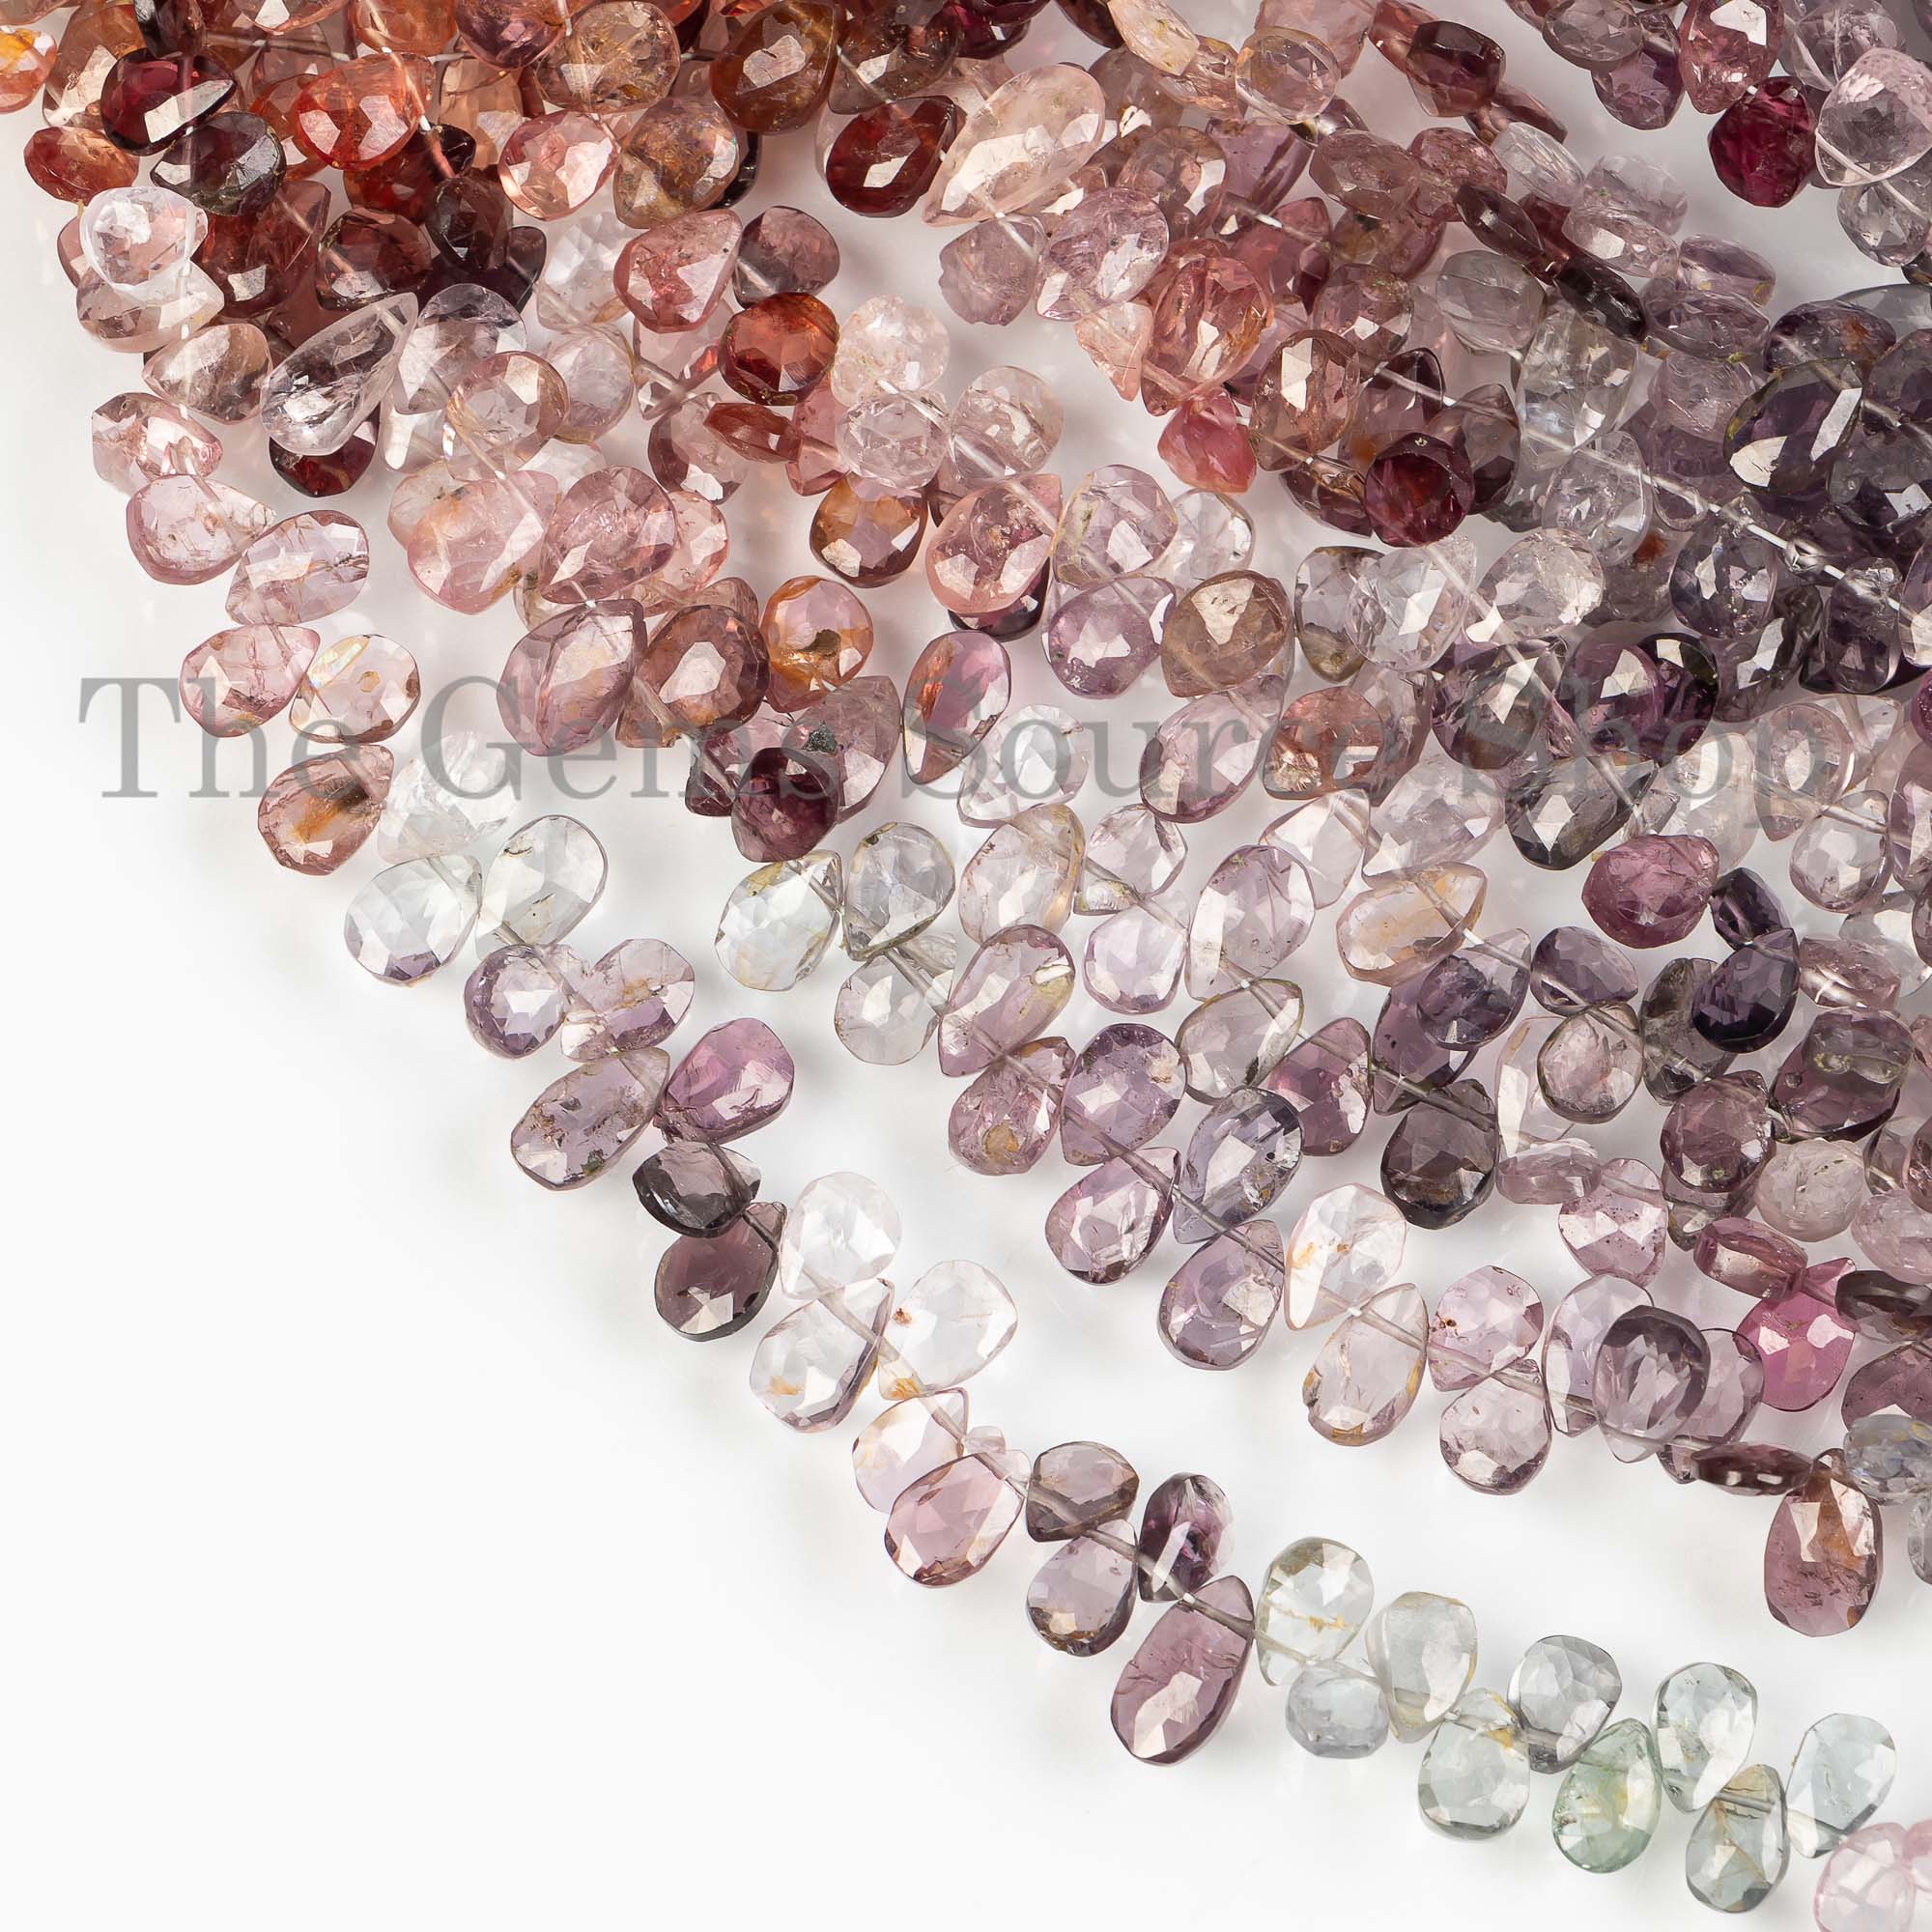 Natural Multi Spinel Beads, Multi Spinel Faceted Beads, Spinel Rondelle Shape Beads, Wholesale Beads